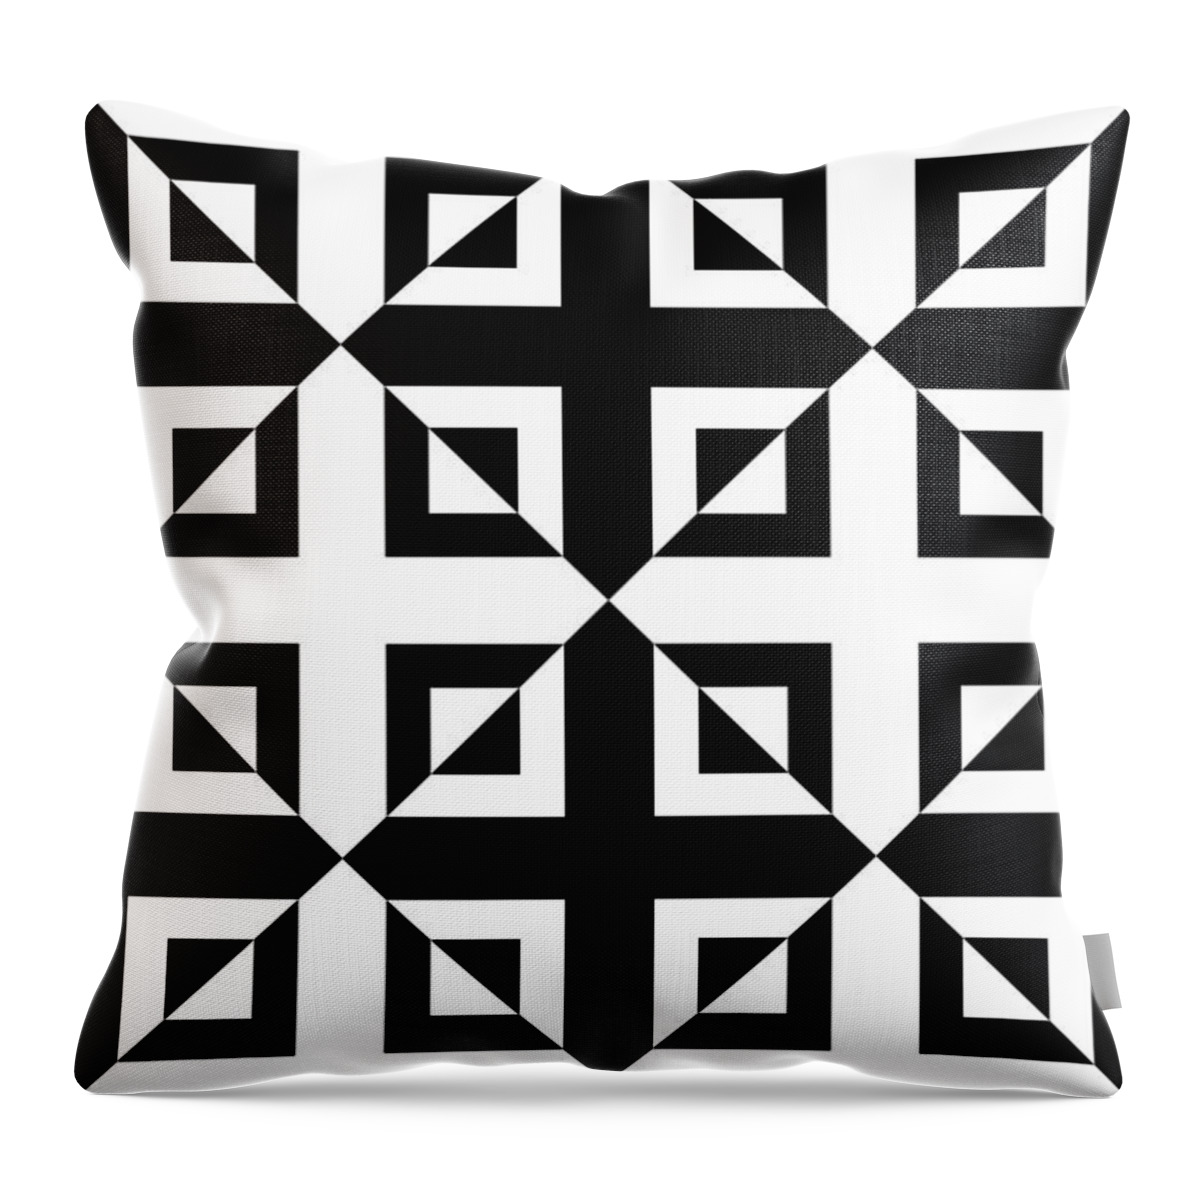 Squares Throw Pillow featuring the digital art Mind Games 42 se by Mike McGlothlen